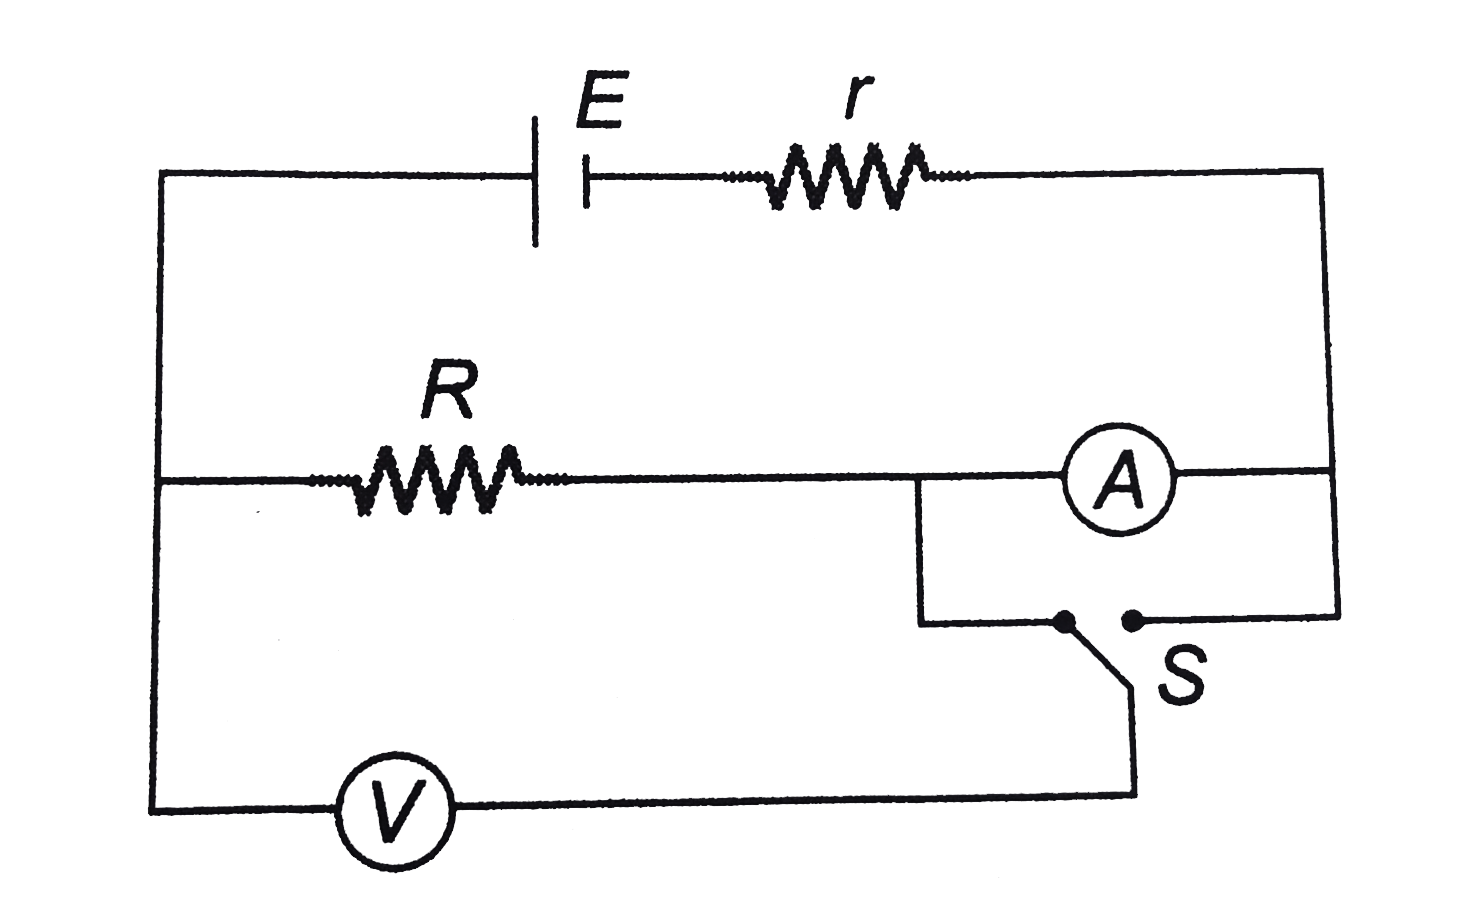 The emf E and the internal resistance r of the battery shown in figure are 4.3 V and 1.0 Omega respectively. The external resistance R is 50 Omega. The resistances of the ammeter and voltmeter are 2.0 Omega and 200 Omega respectively.   (a) Find the readings of the two meters.  (b) The switch is thrown to the other side. What will be the readings of the two meters now?